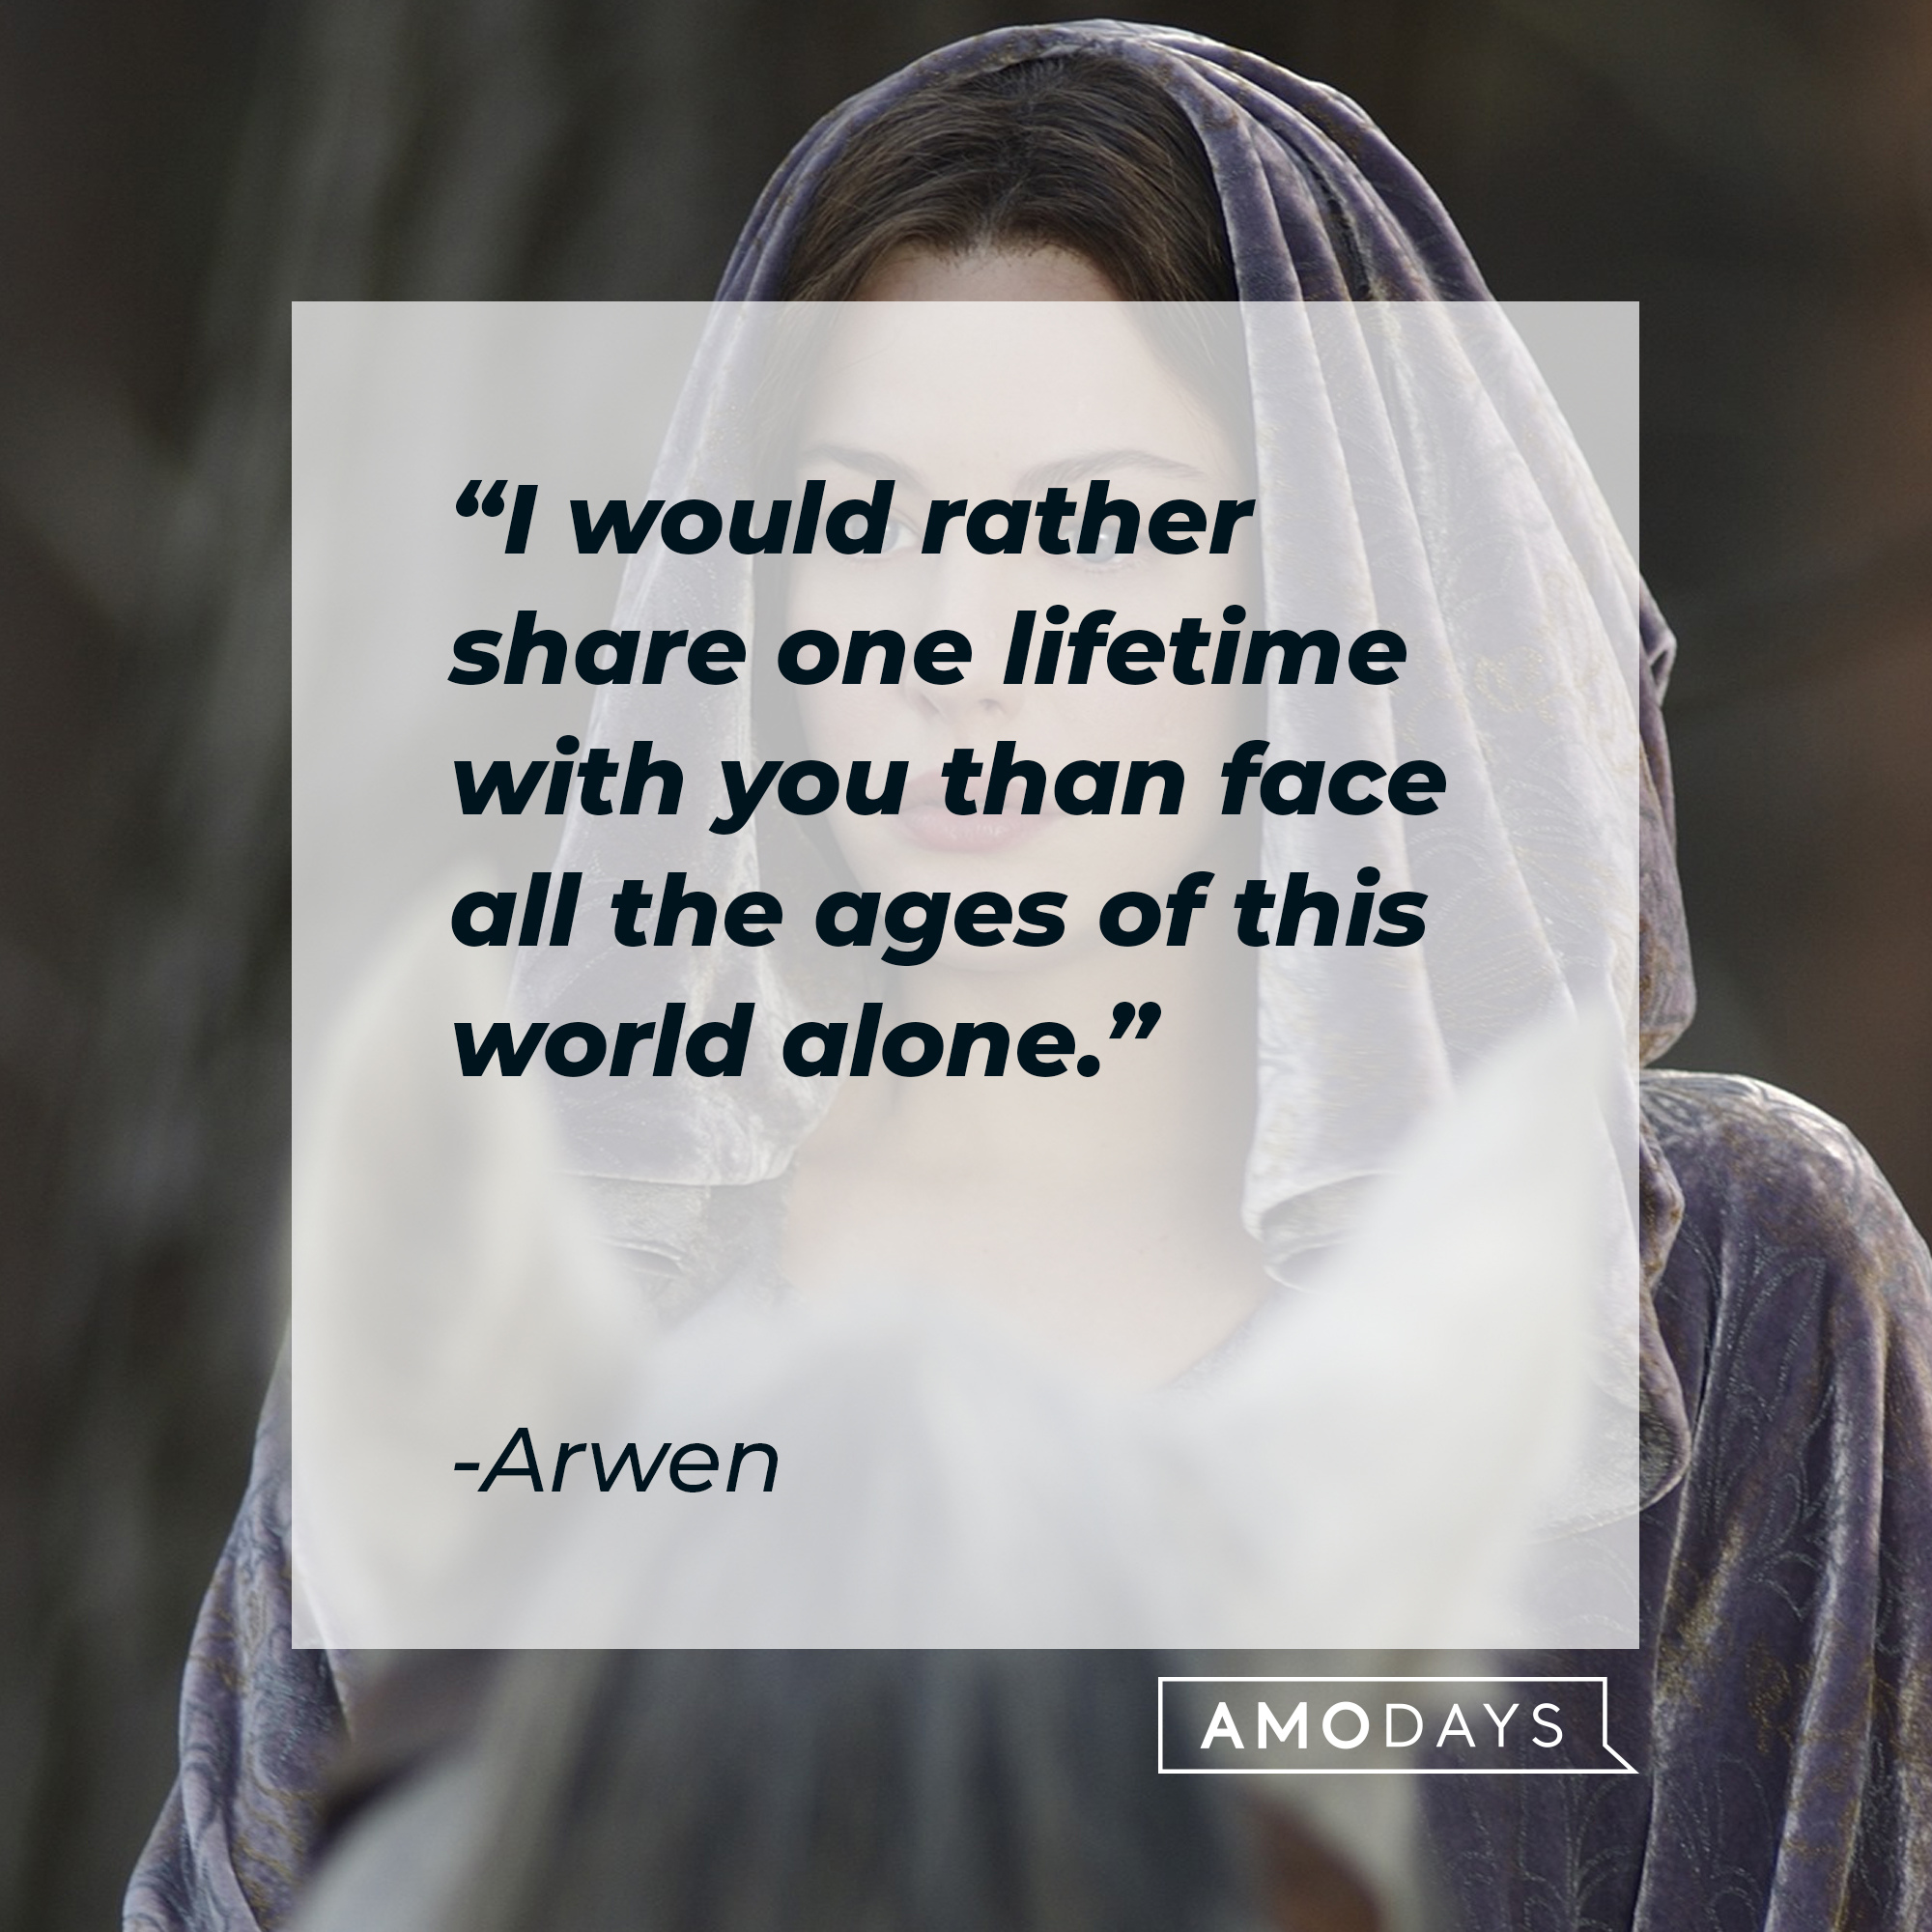 Arwen with his quote from "The Lord of the Rings:" "I would rather share one lifetime with you than face all the ages of this world alone." | Source: Facebook/lordoftheringstrilogy